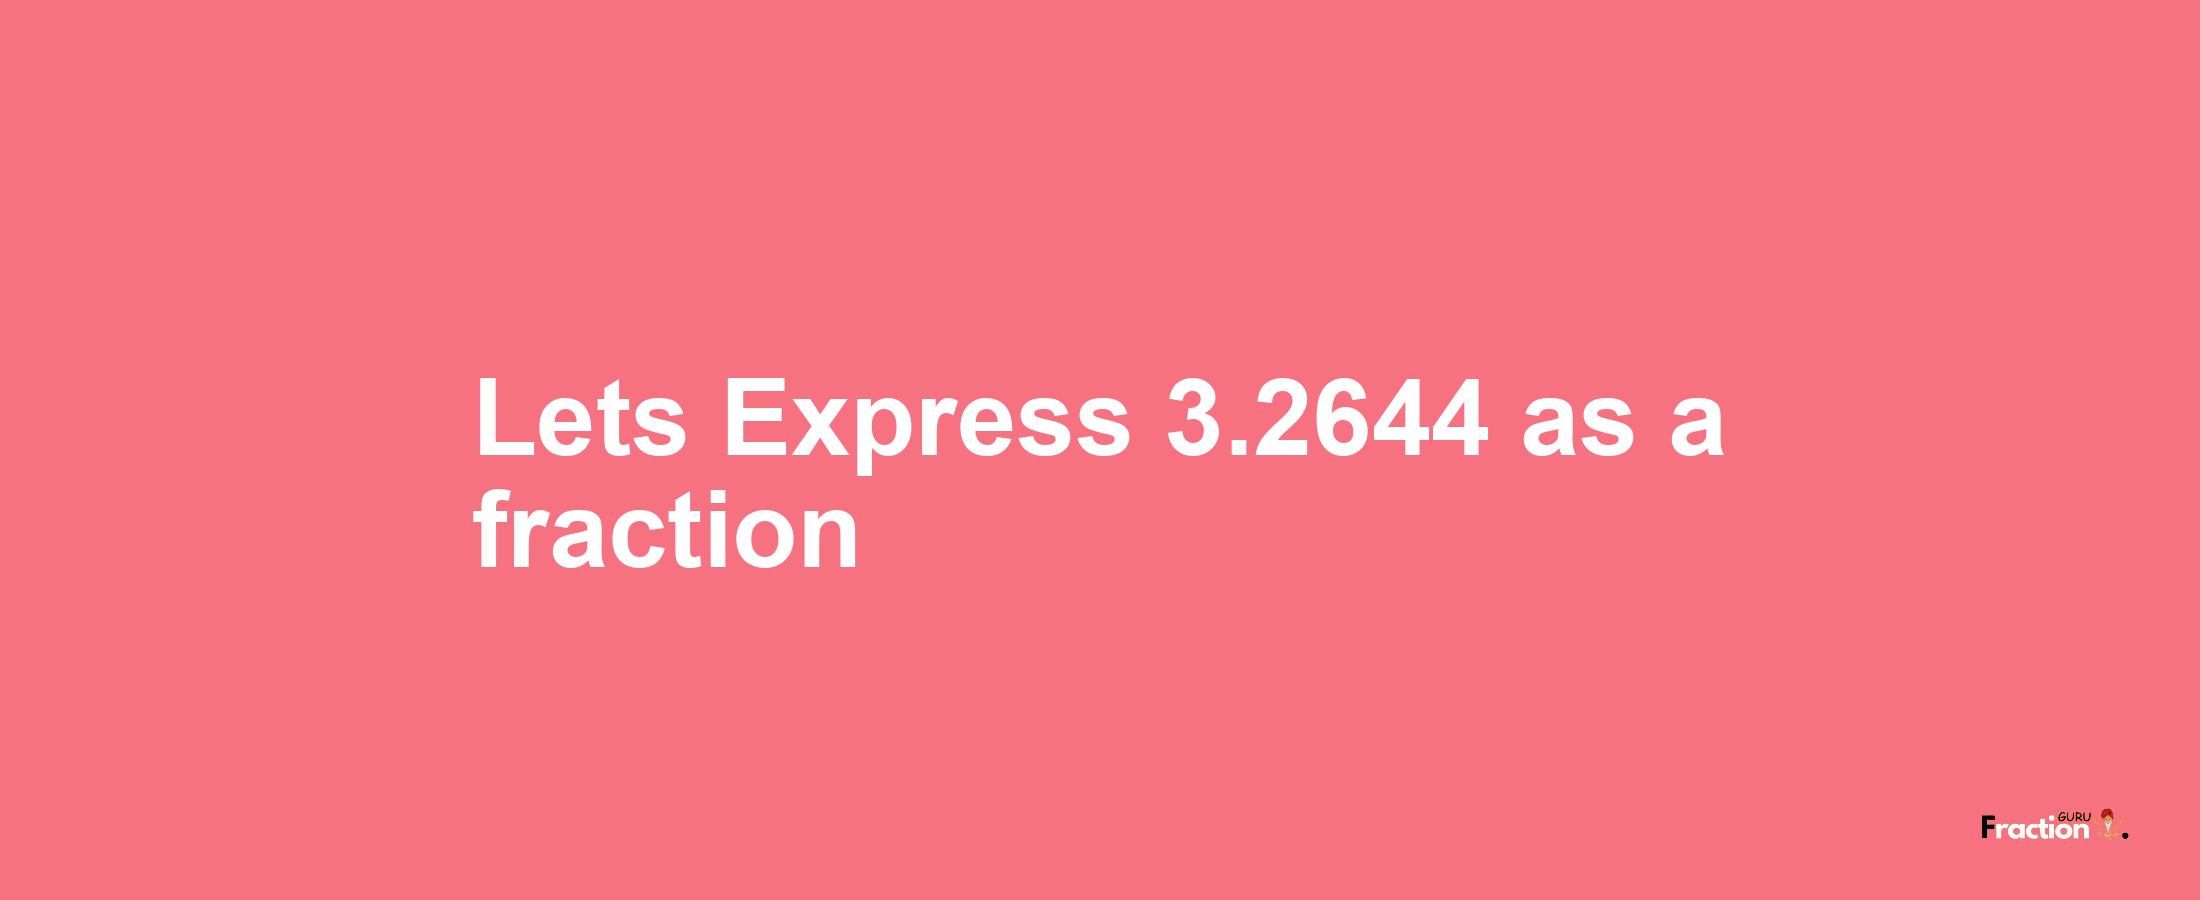 Lets Express 3.2644 as afraction